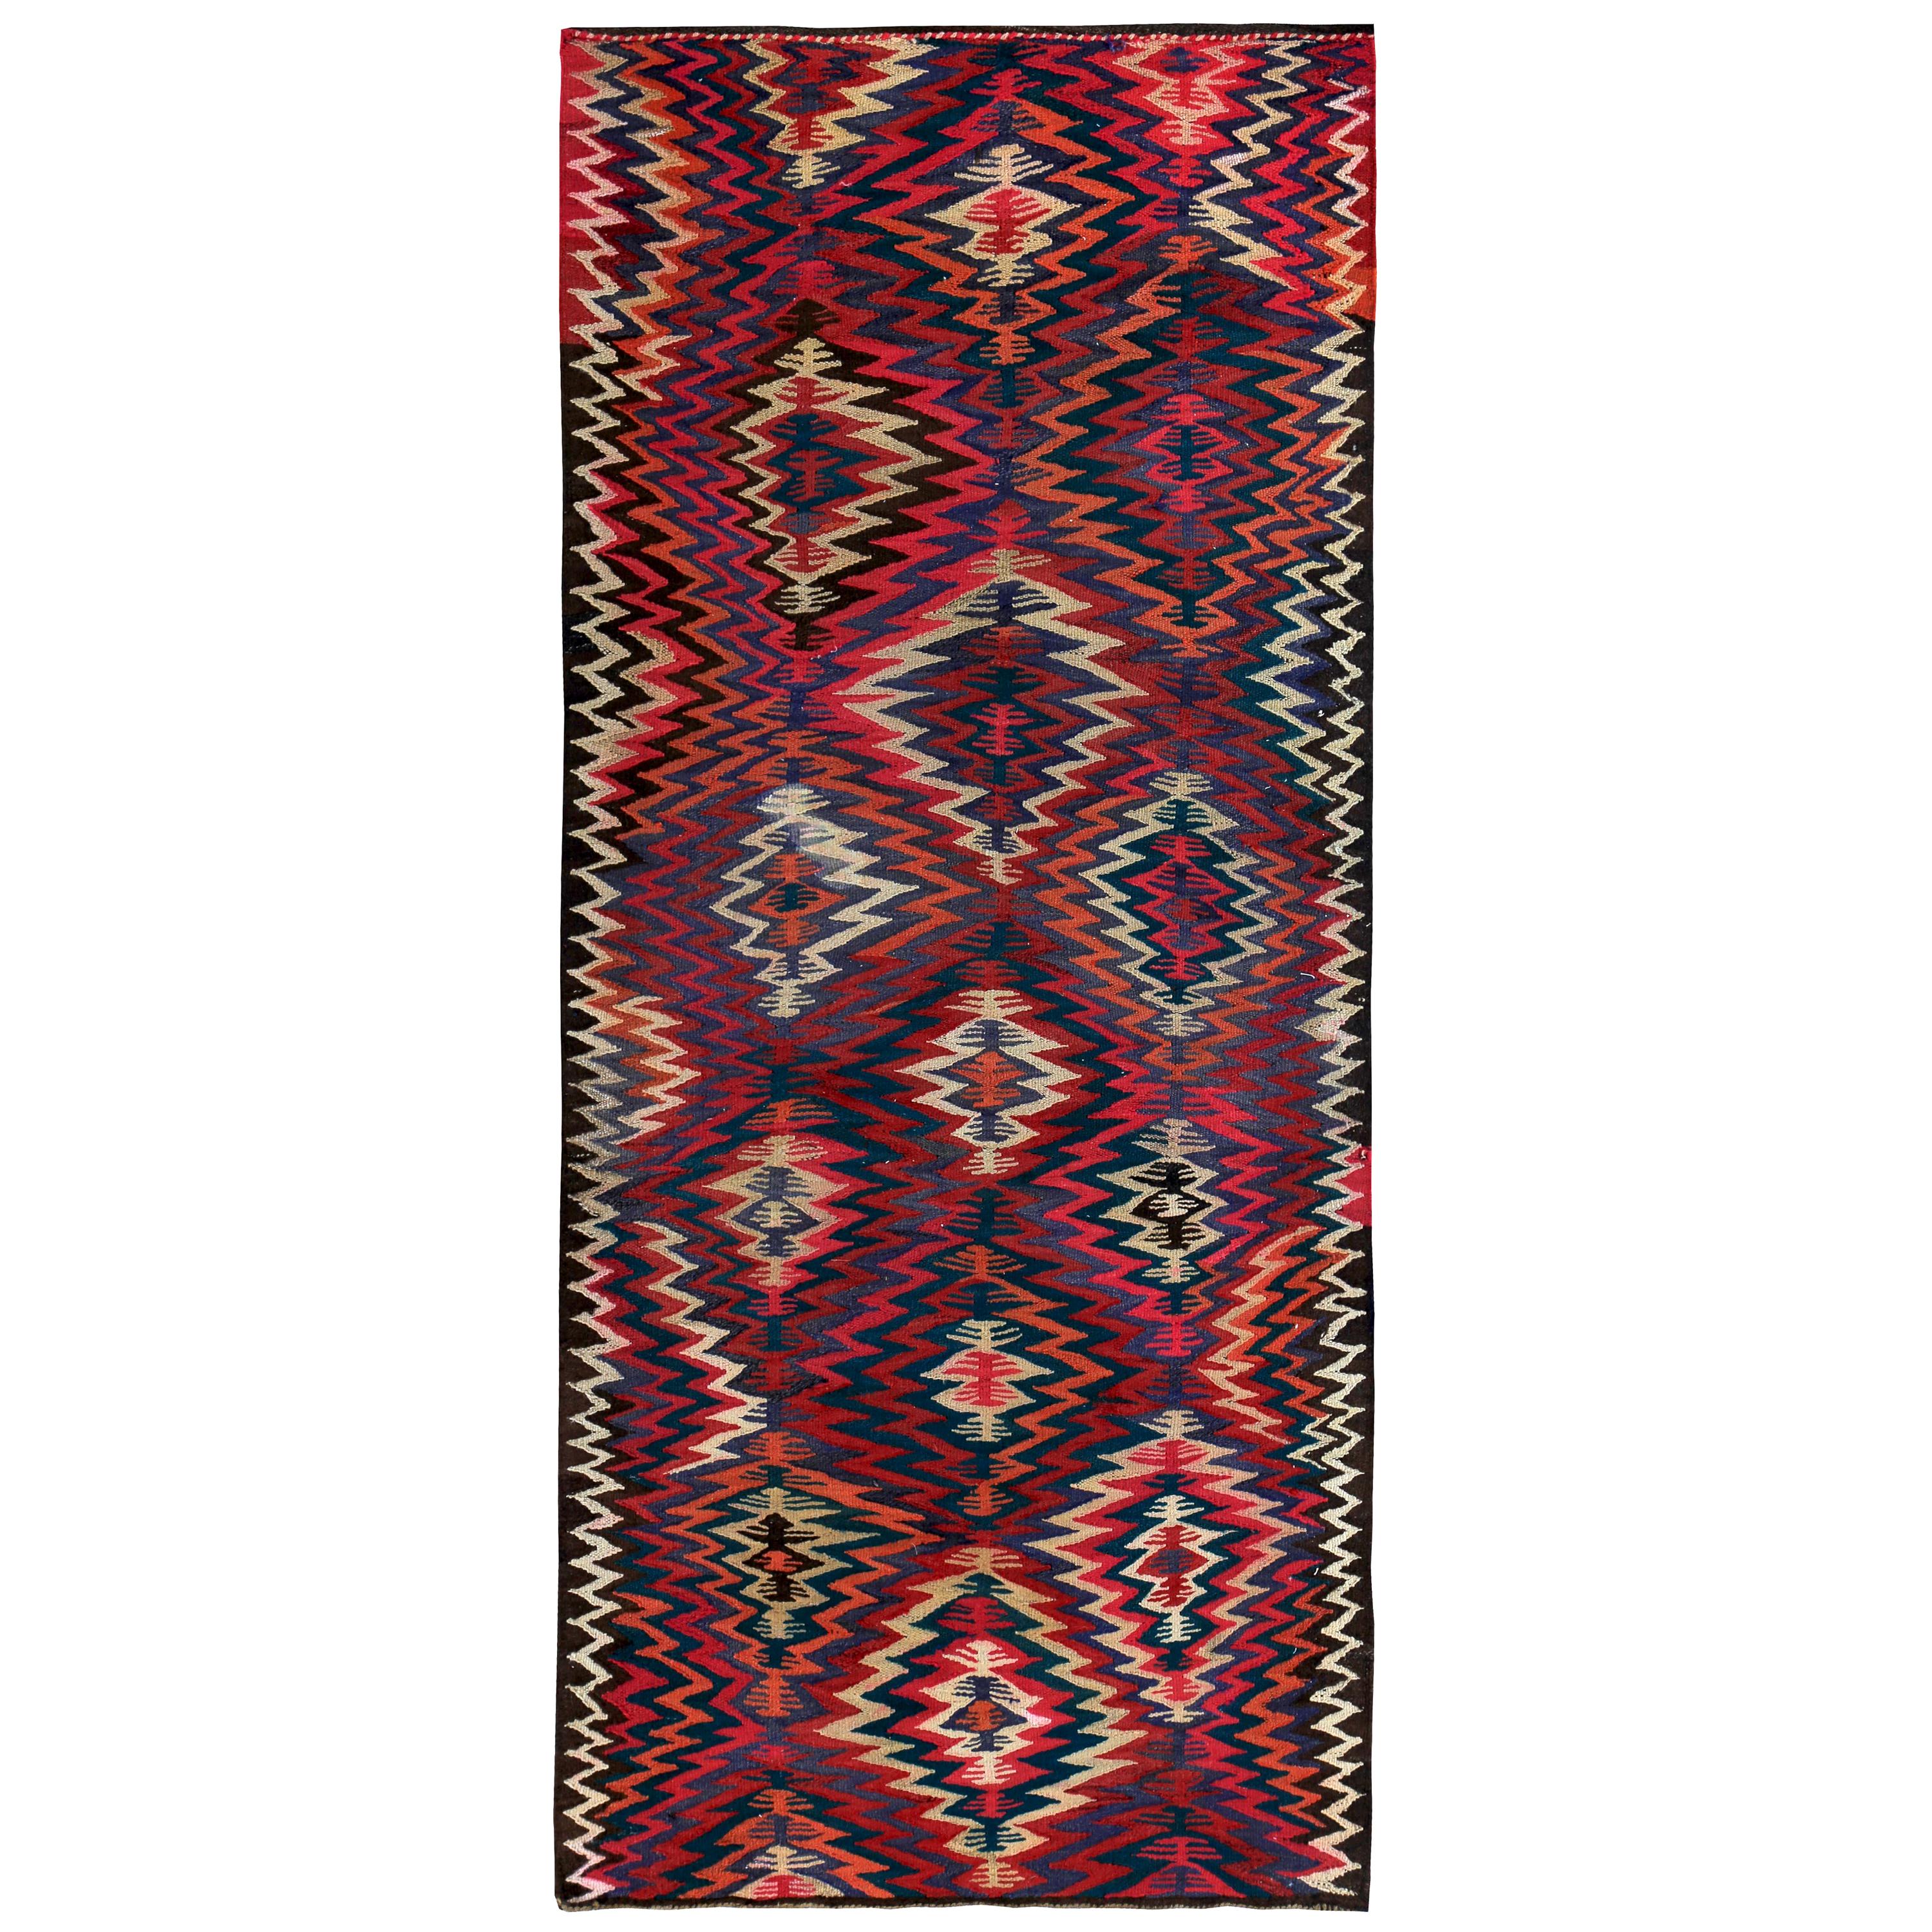 Turkish Kilim Runner Rug with Tribal Details in Pink, Red and Purple For Sale